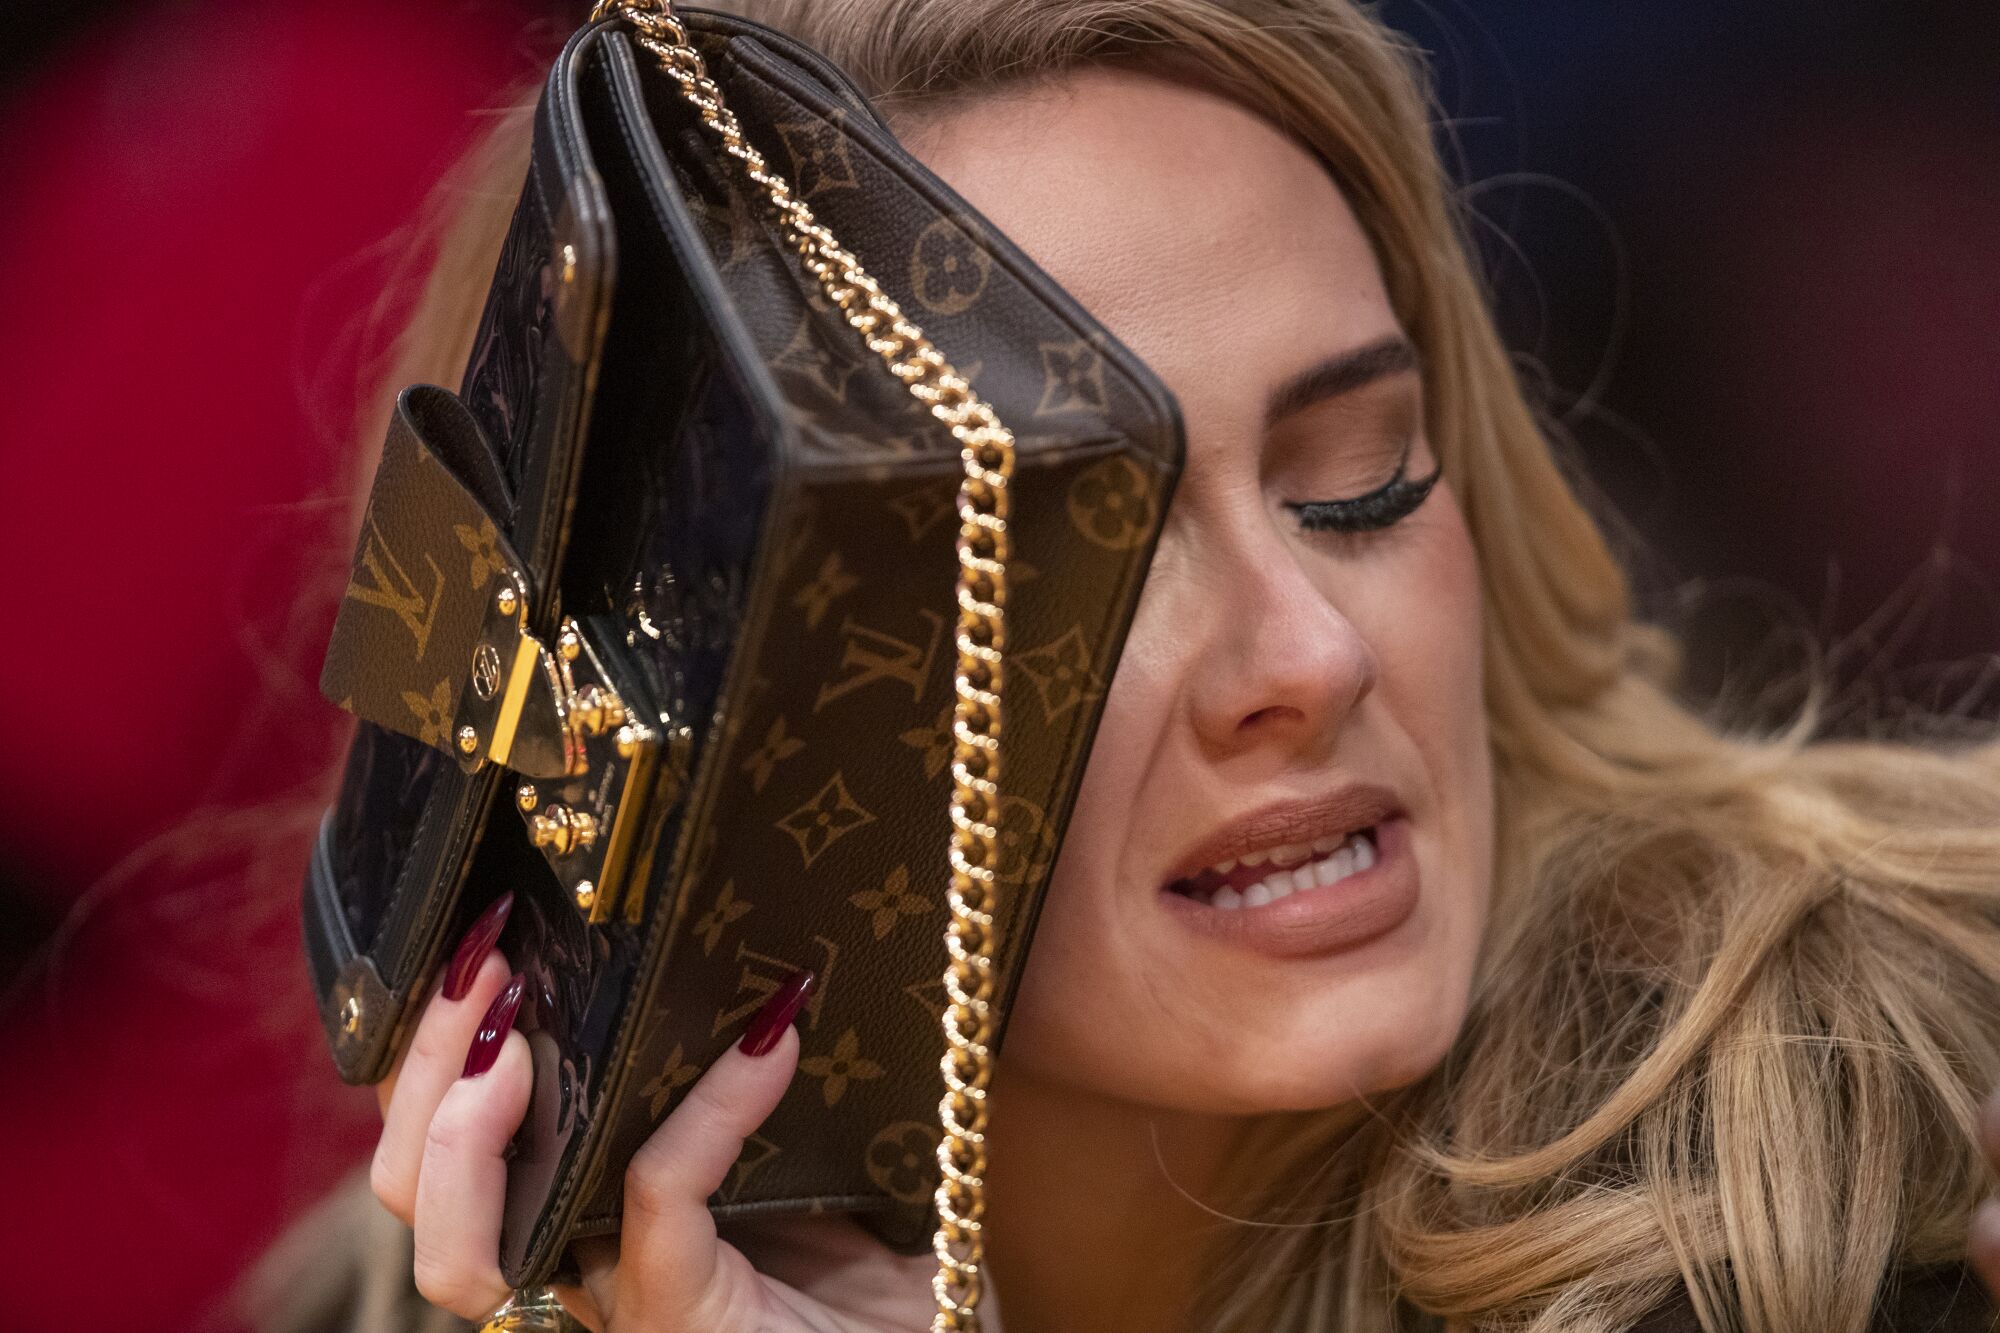 Singer Adele uses her purse to hide from the TV camera.